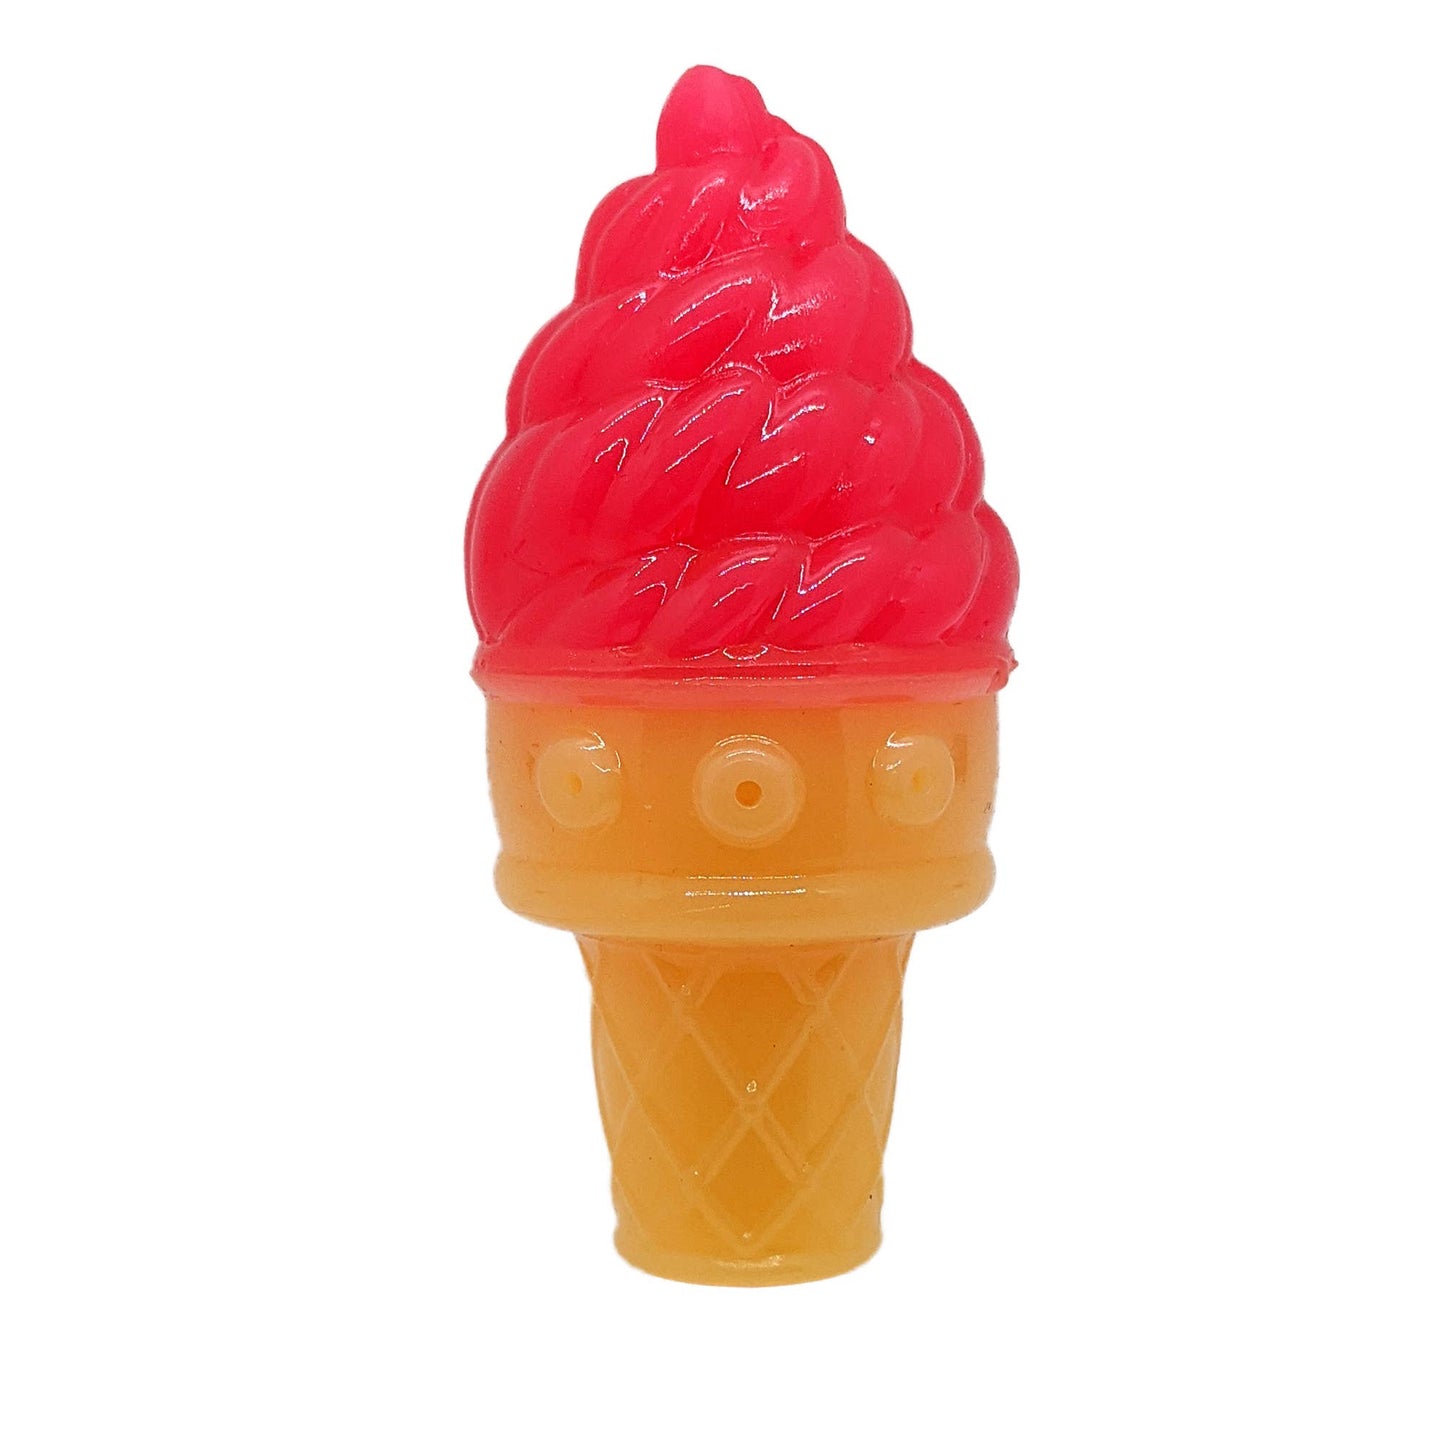 Recyclable and Freezable Ice Cream Cone Chew Toy Small Image